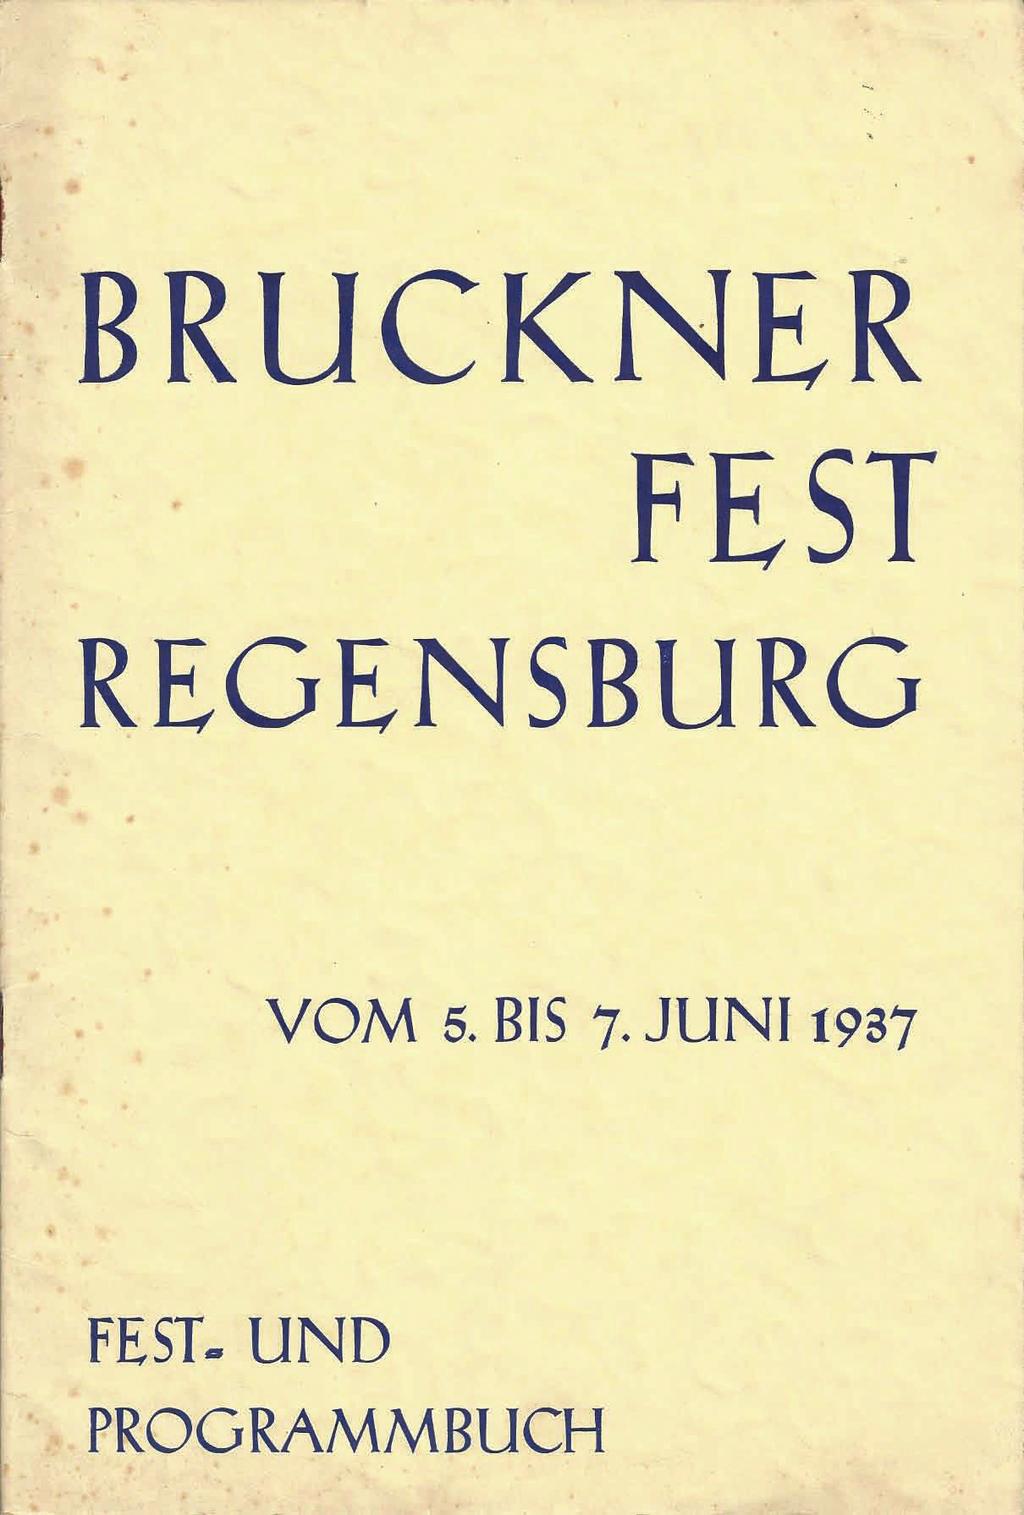 A Bruckner Sixth by Hans Weissbach and a Symphony No.